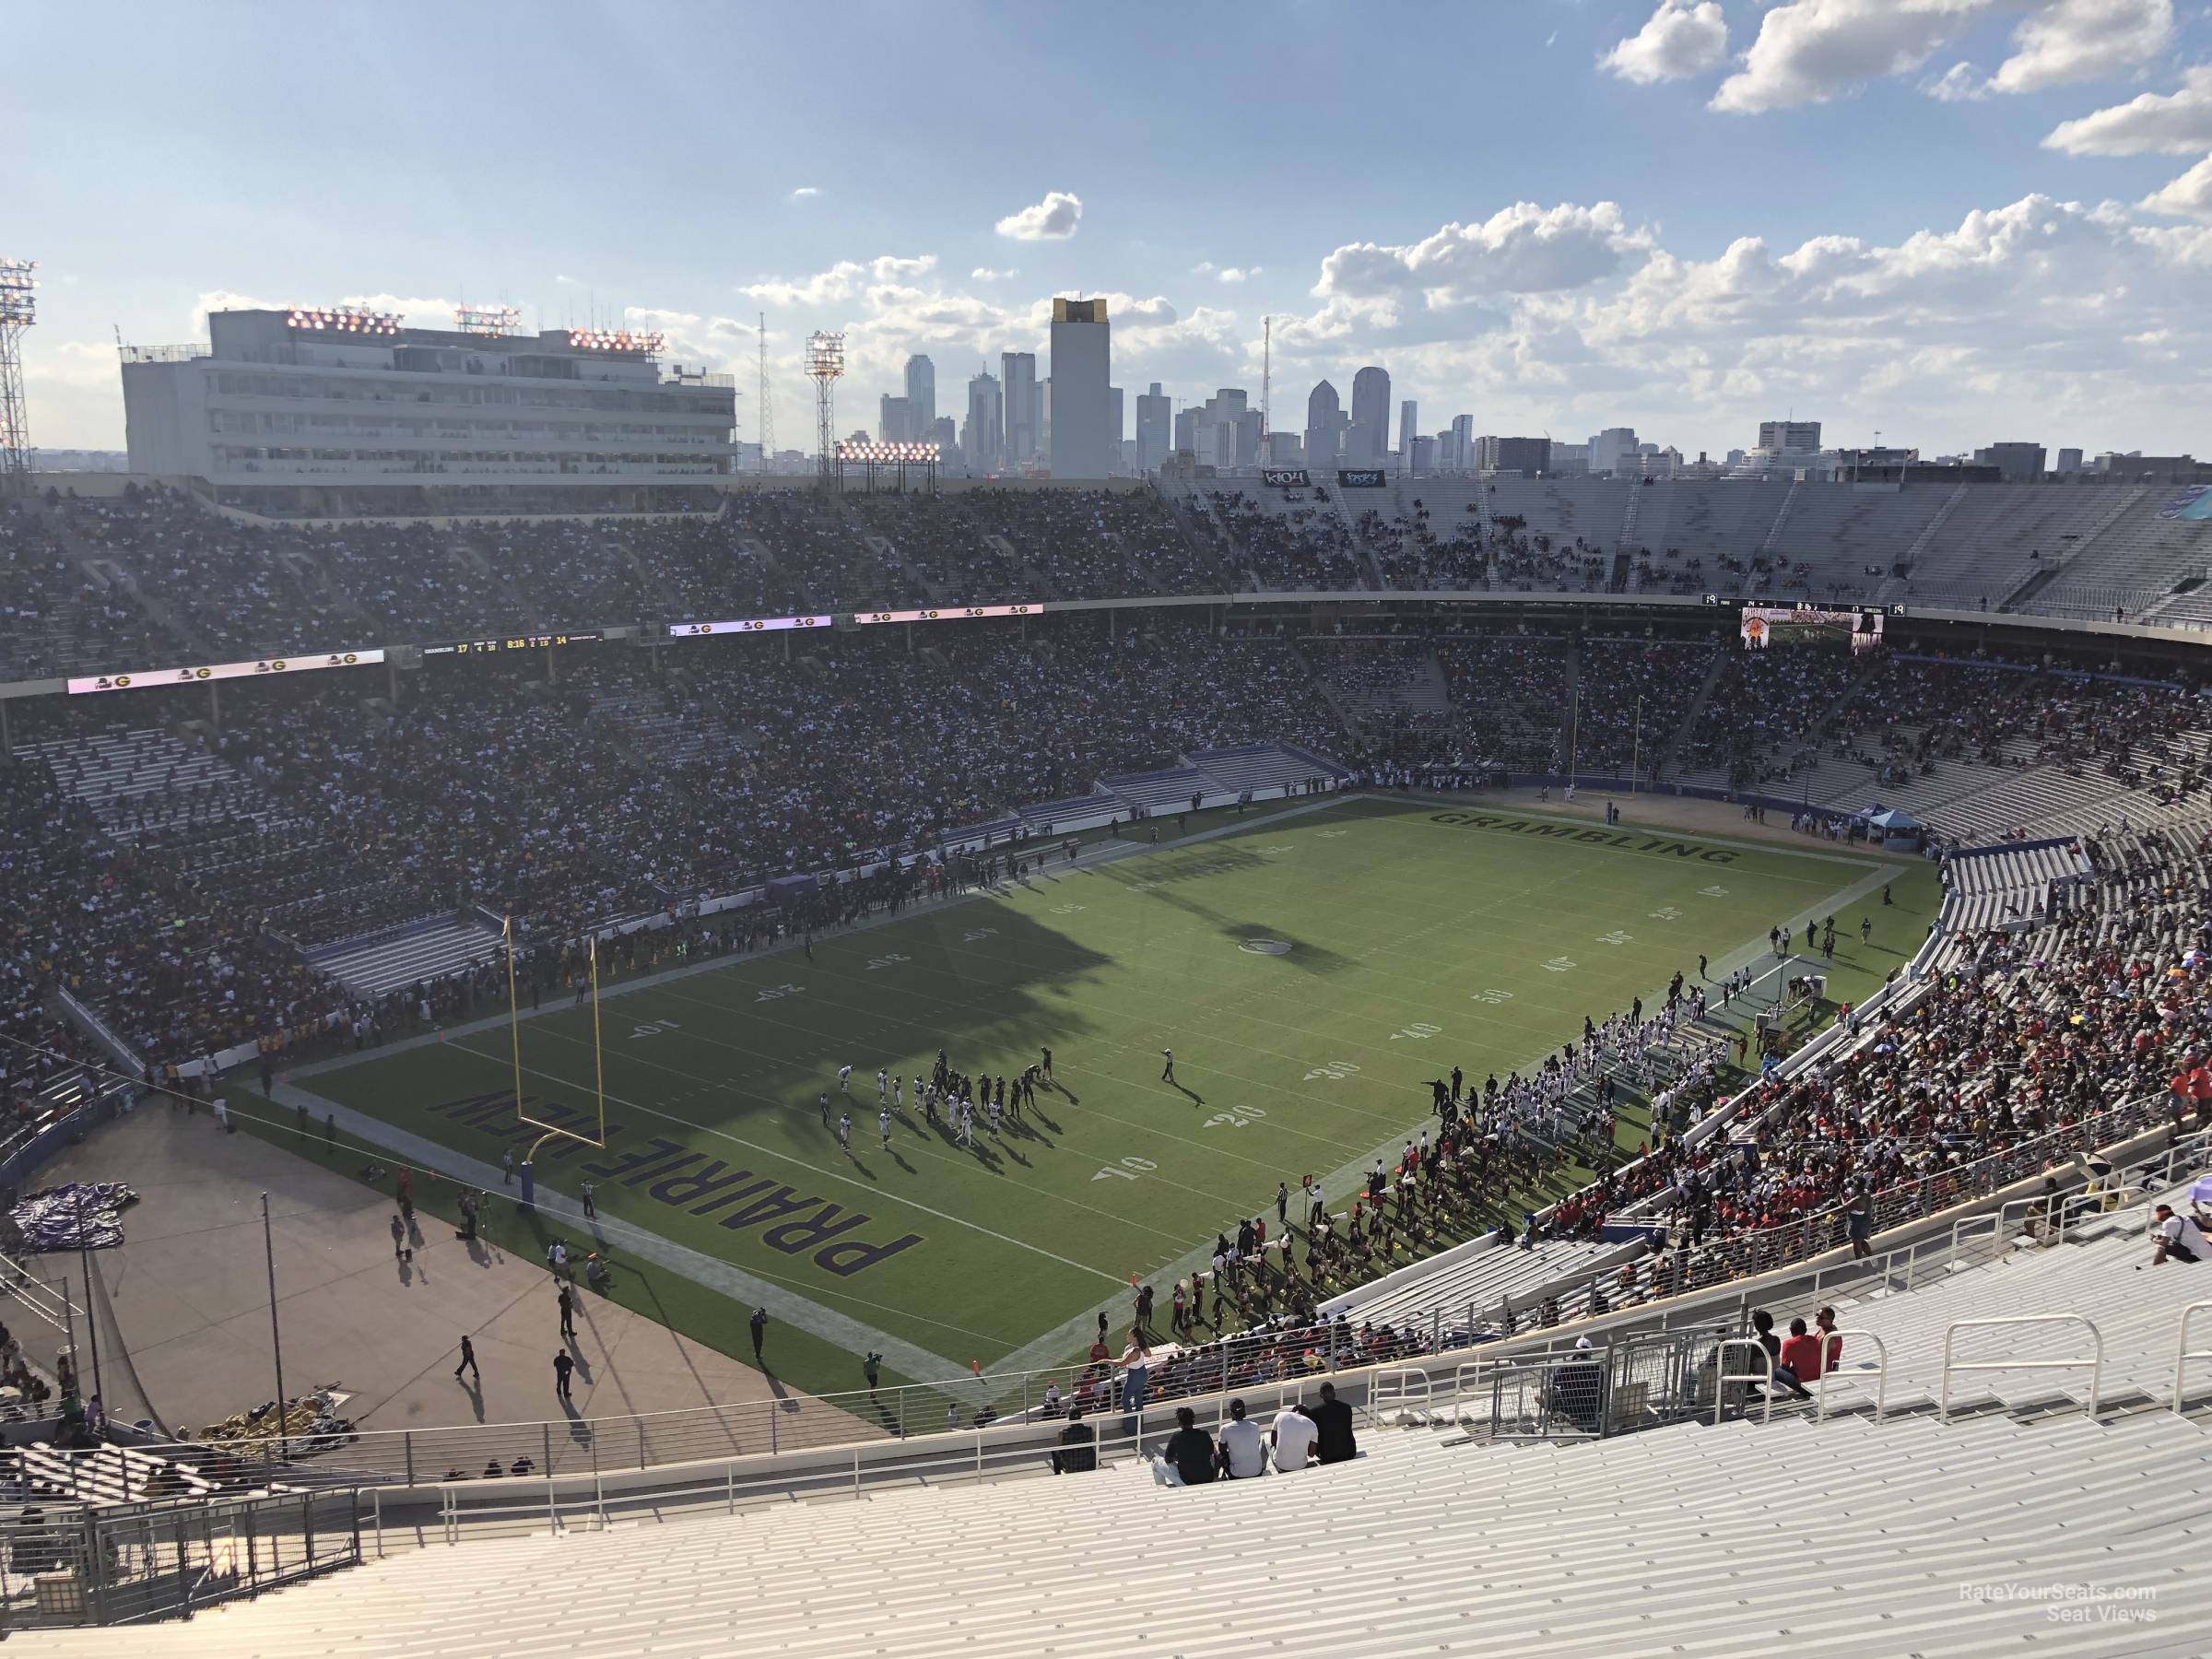 section 135, row 34 seat view  - cotton bowl